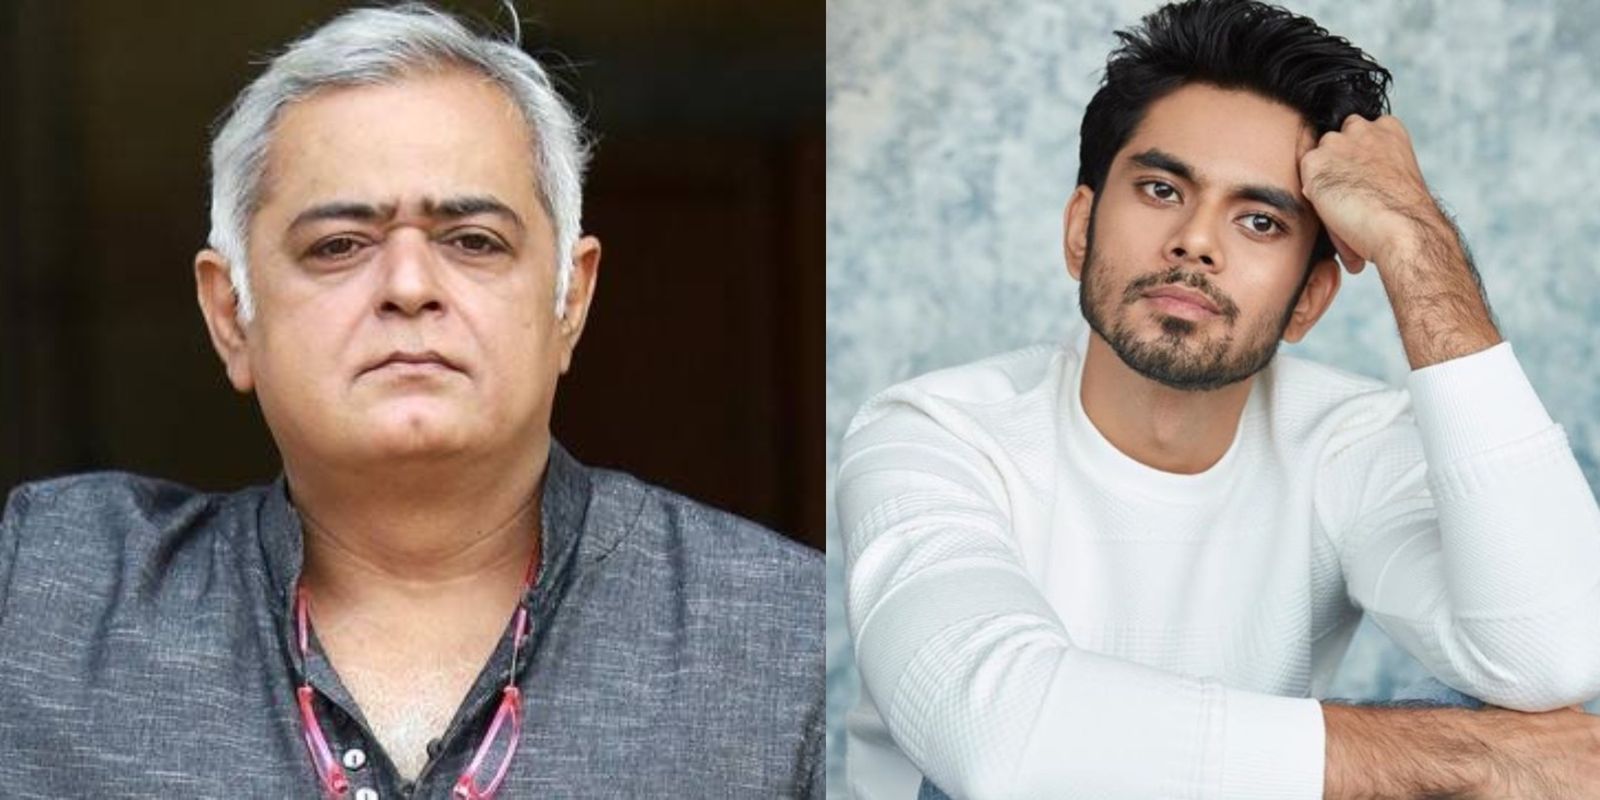 Paresh Rawal's Son Aditya Rawal's Next To Be Directed By Hansal Mehta? Here's What We Know